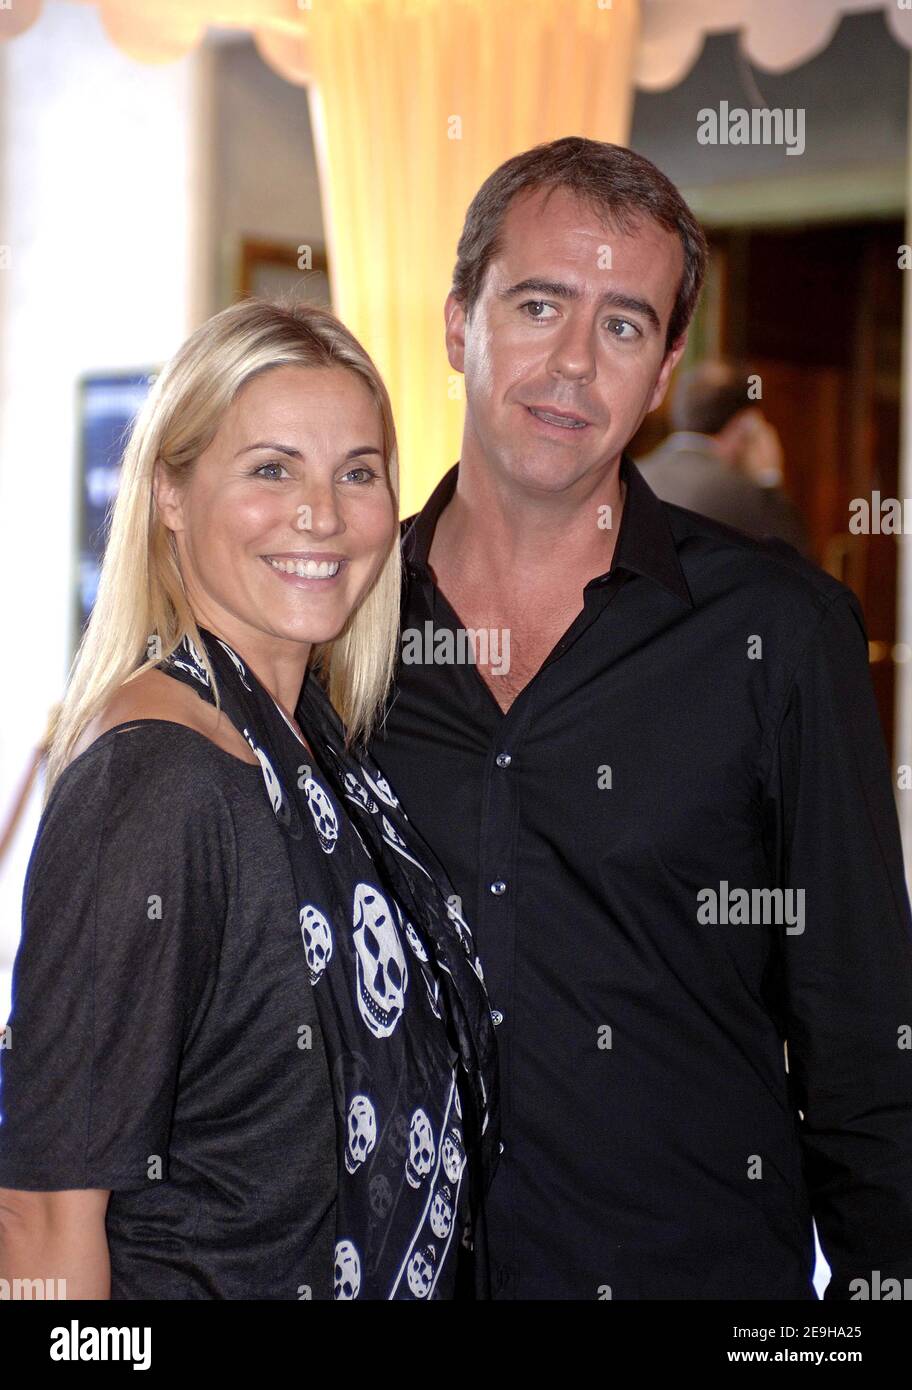 Sophie Favier and Bruno Robles arrive at the TF1 annual press conference held at the Theatre Des Champs-Elysees in Paris, France on September 5, 2006. Photo by Giancarlo Gorassini/ABACAPRESS.COM Stock Photo